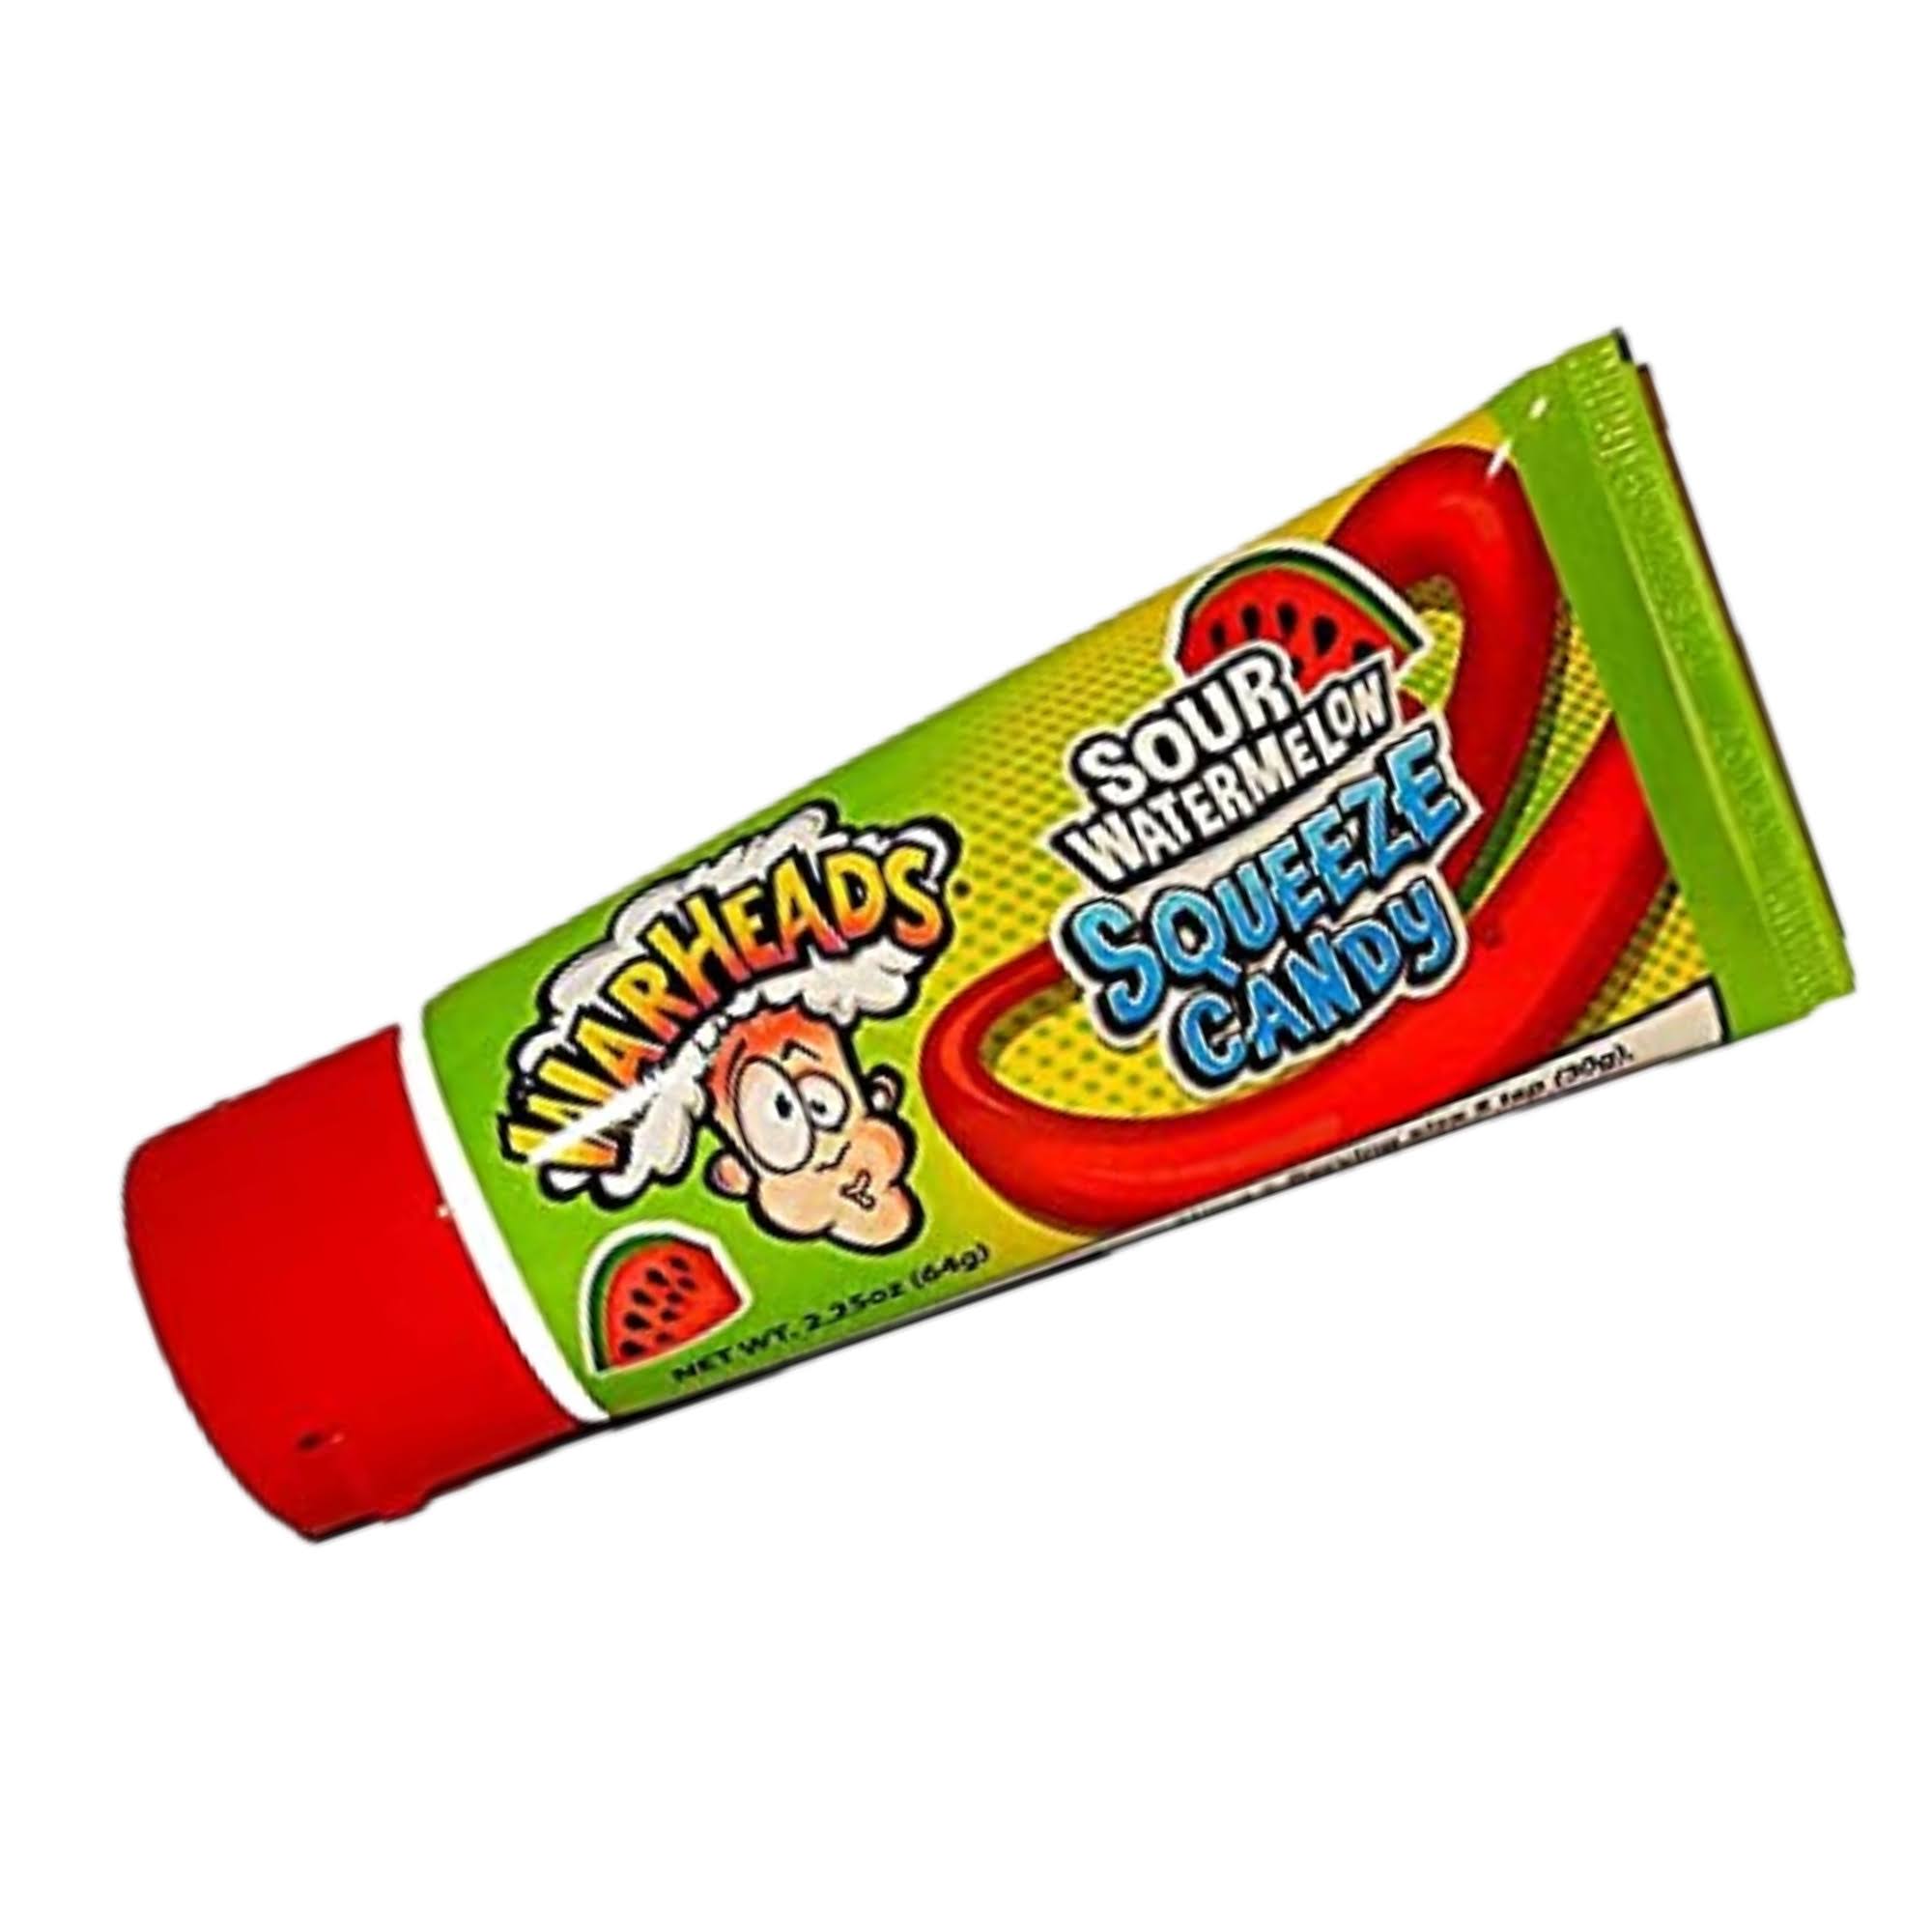 Warheads Sour Watermelon Squeeze Candy 64G American Candy